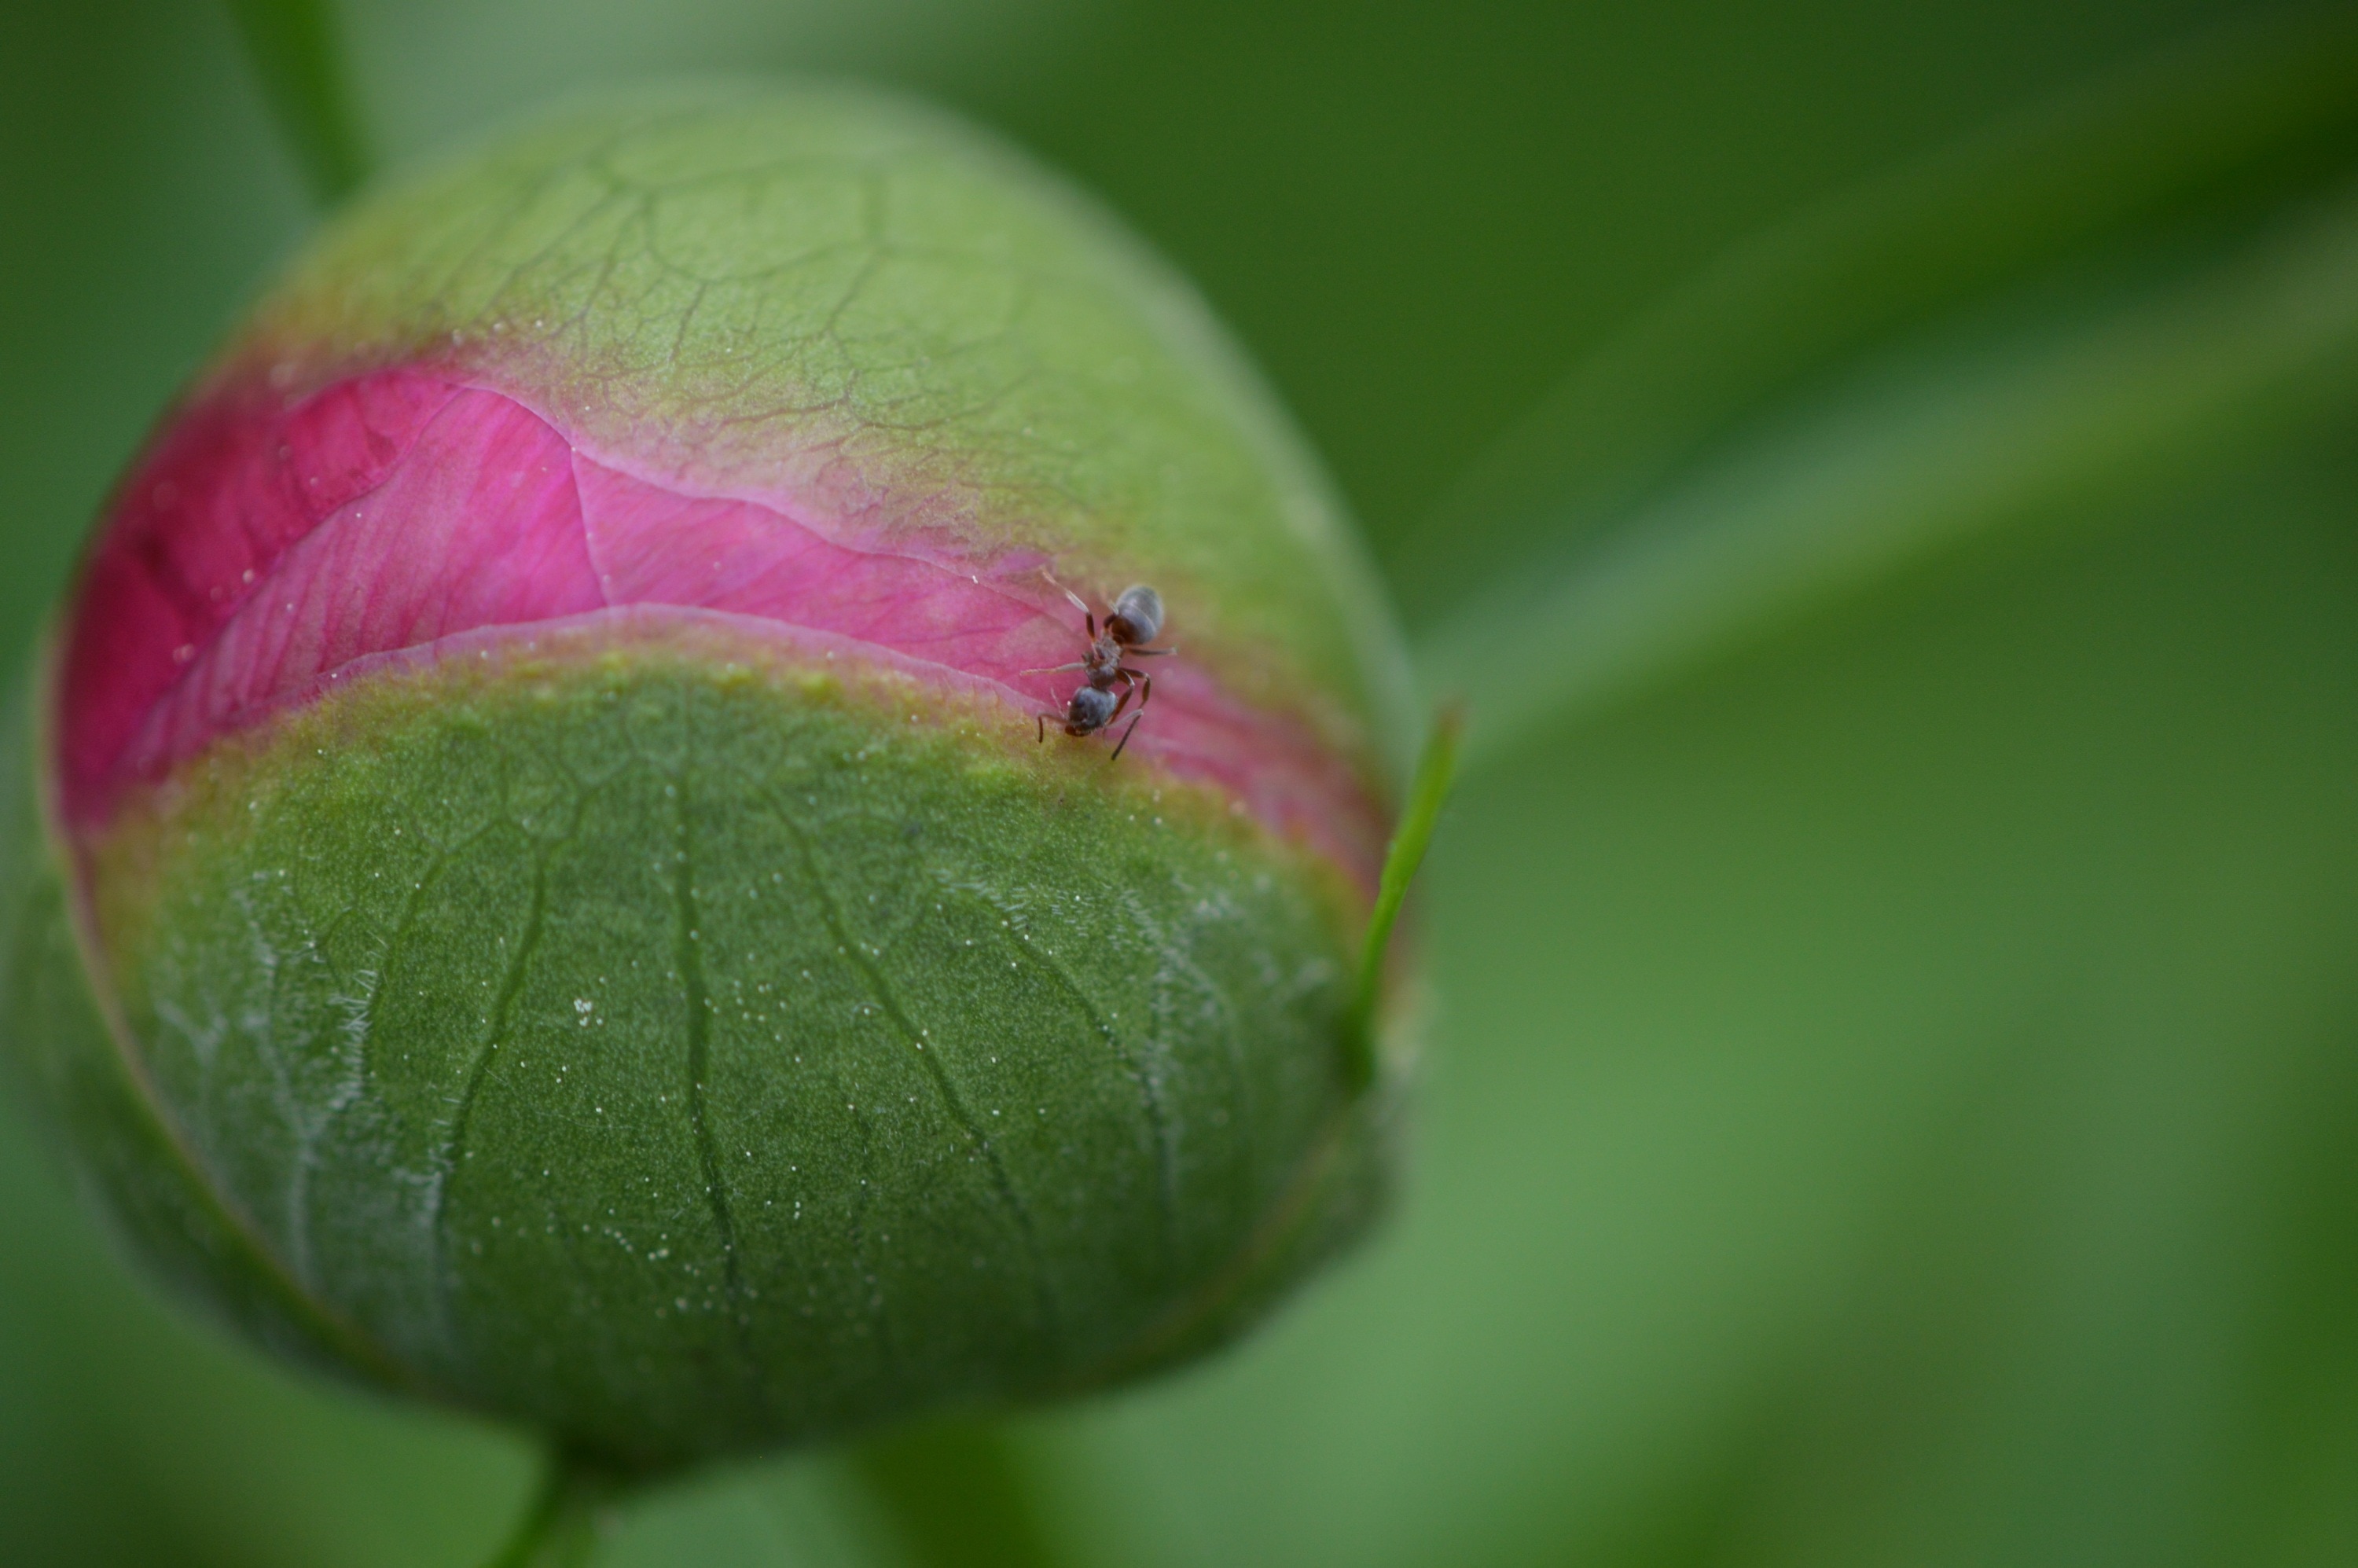 black ant on green-pink flower buds